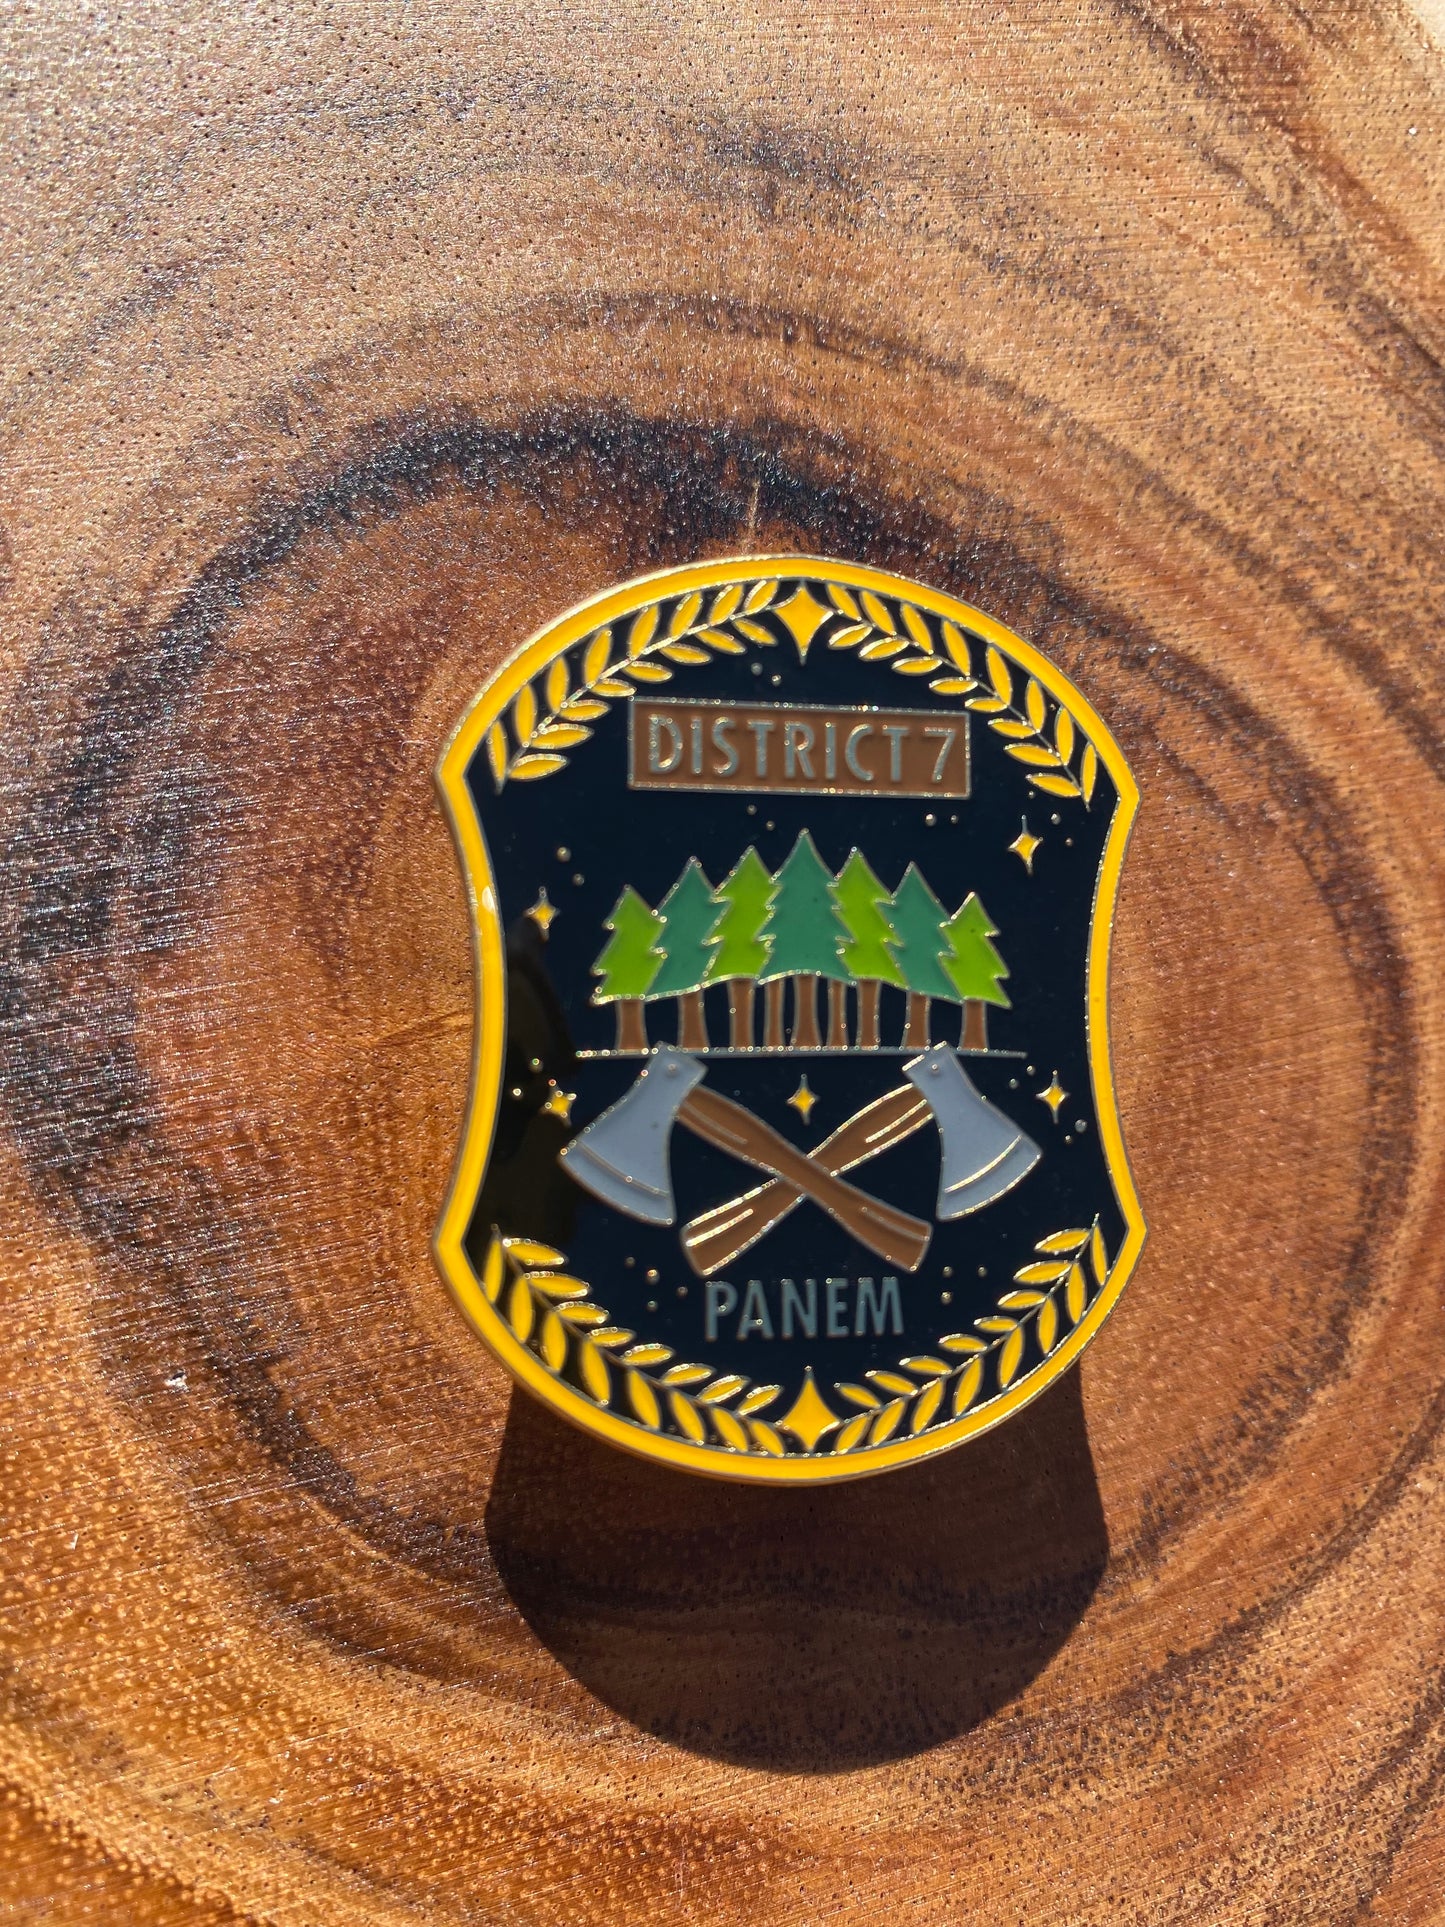 District 7 The Hunger Games Enamel and Epoxy Top Coat Pin